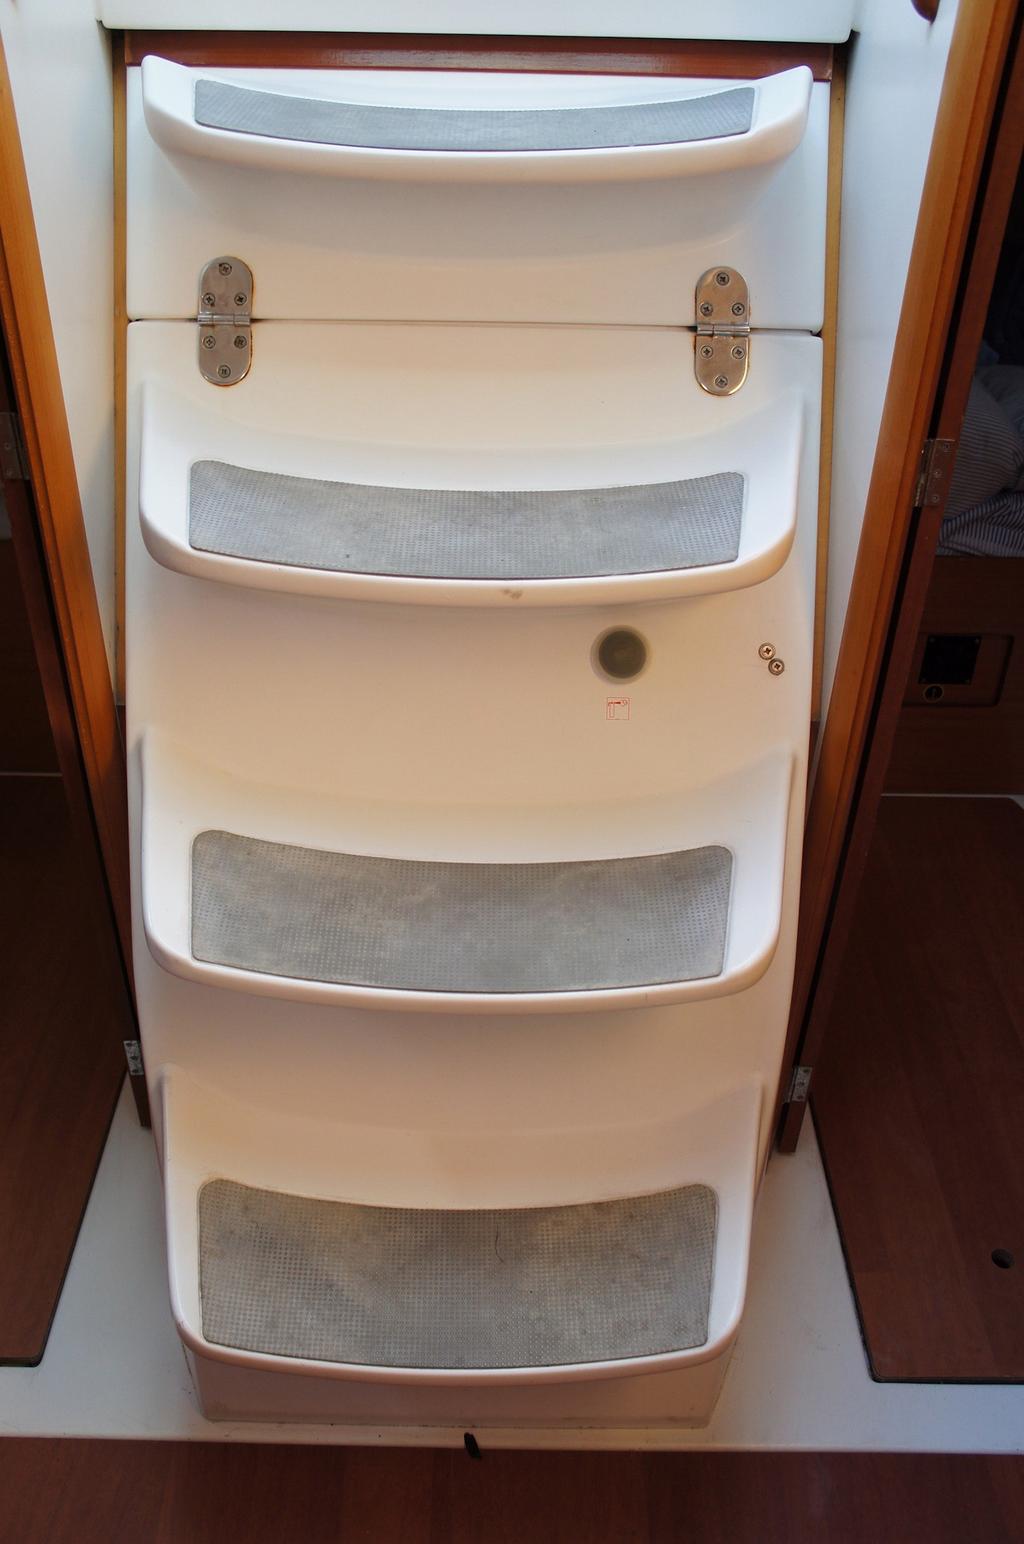 In the event of an engine fire, your companionway stairs is fitted with a small plastic hatch through which